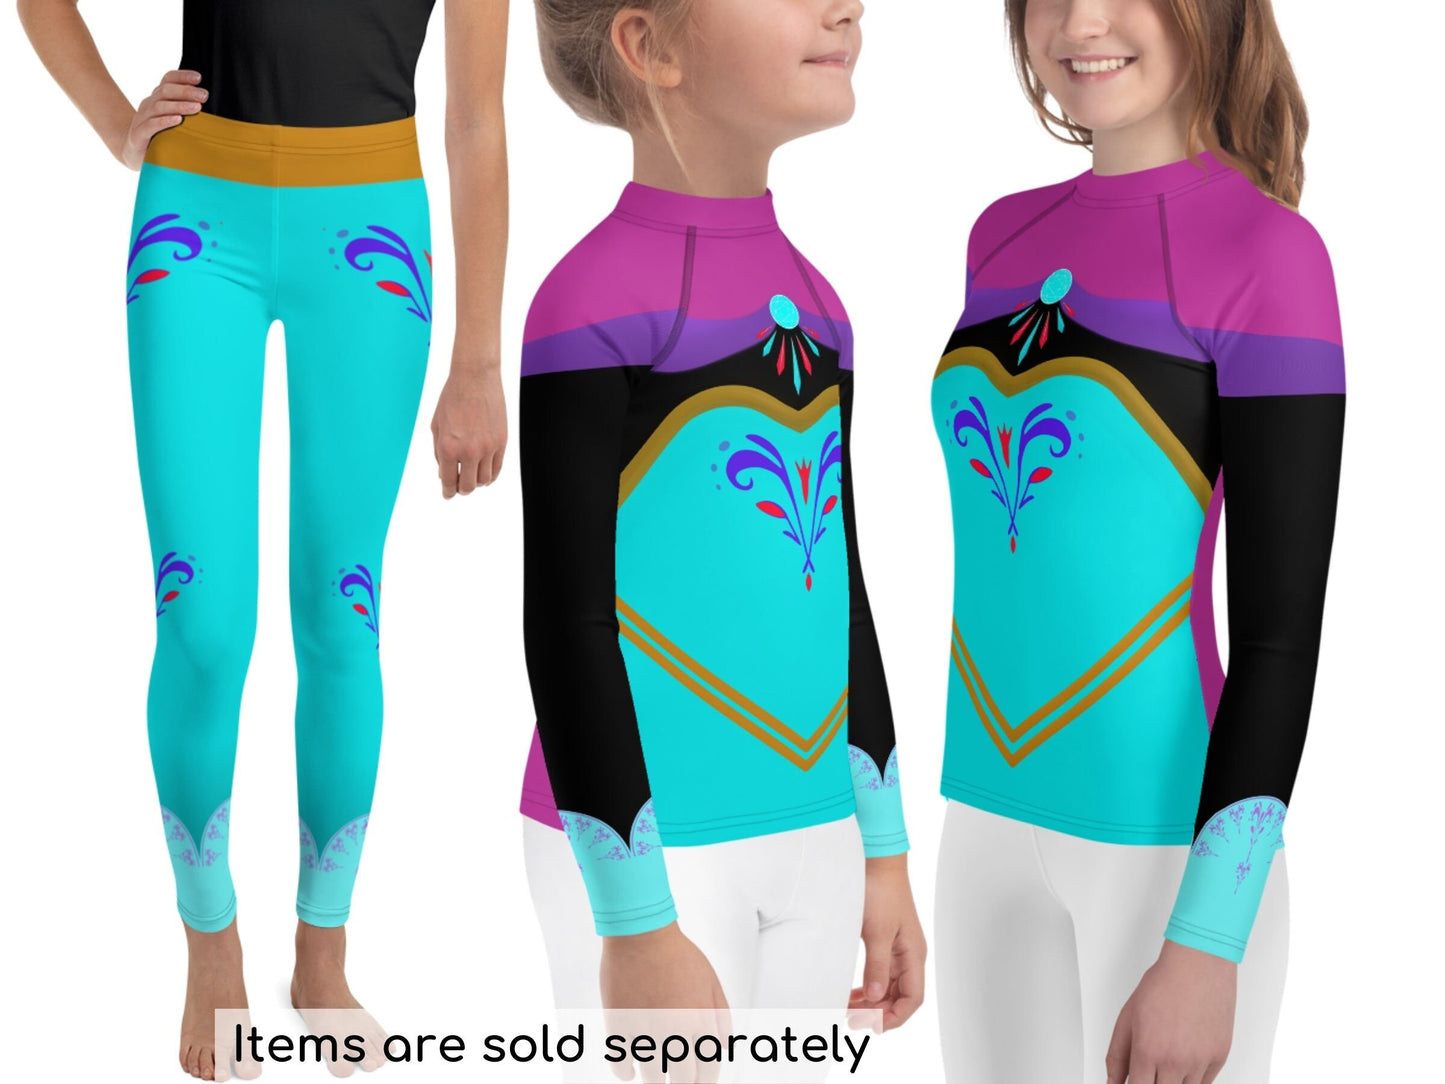 Frozen Elsa Inspired Youths & Kids Leggings and Rash Guard, Halloween Costume, Gift for Toddlers